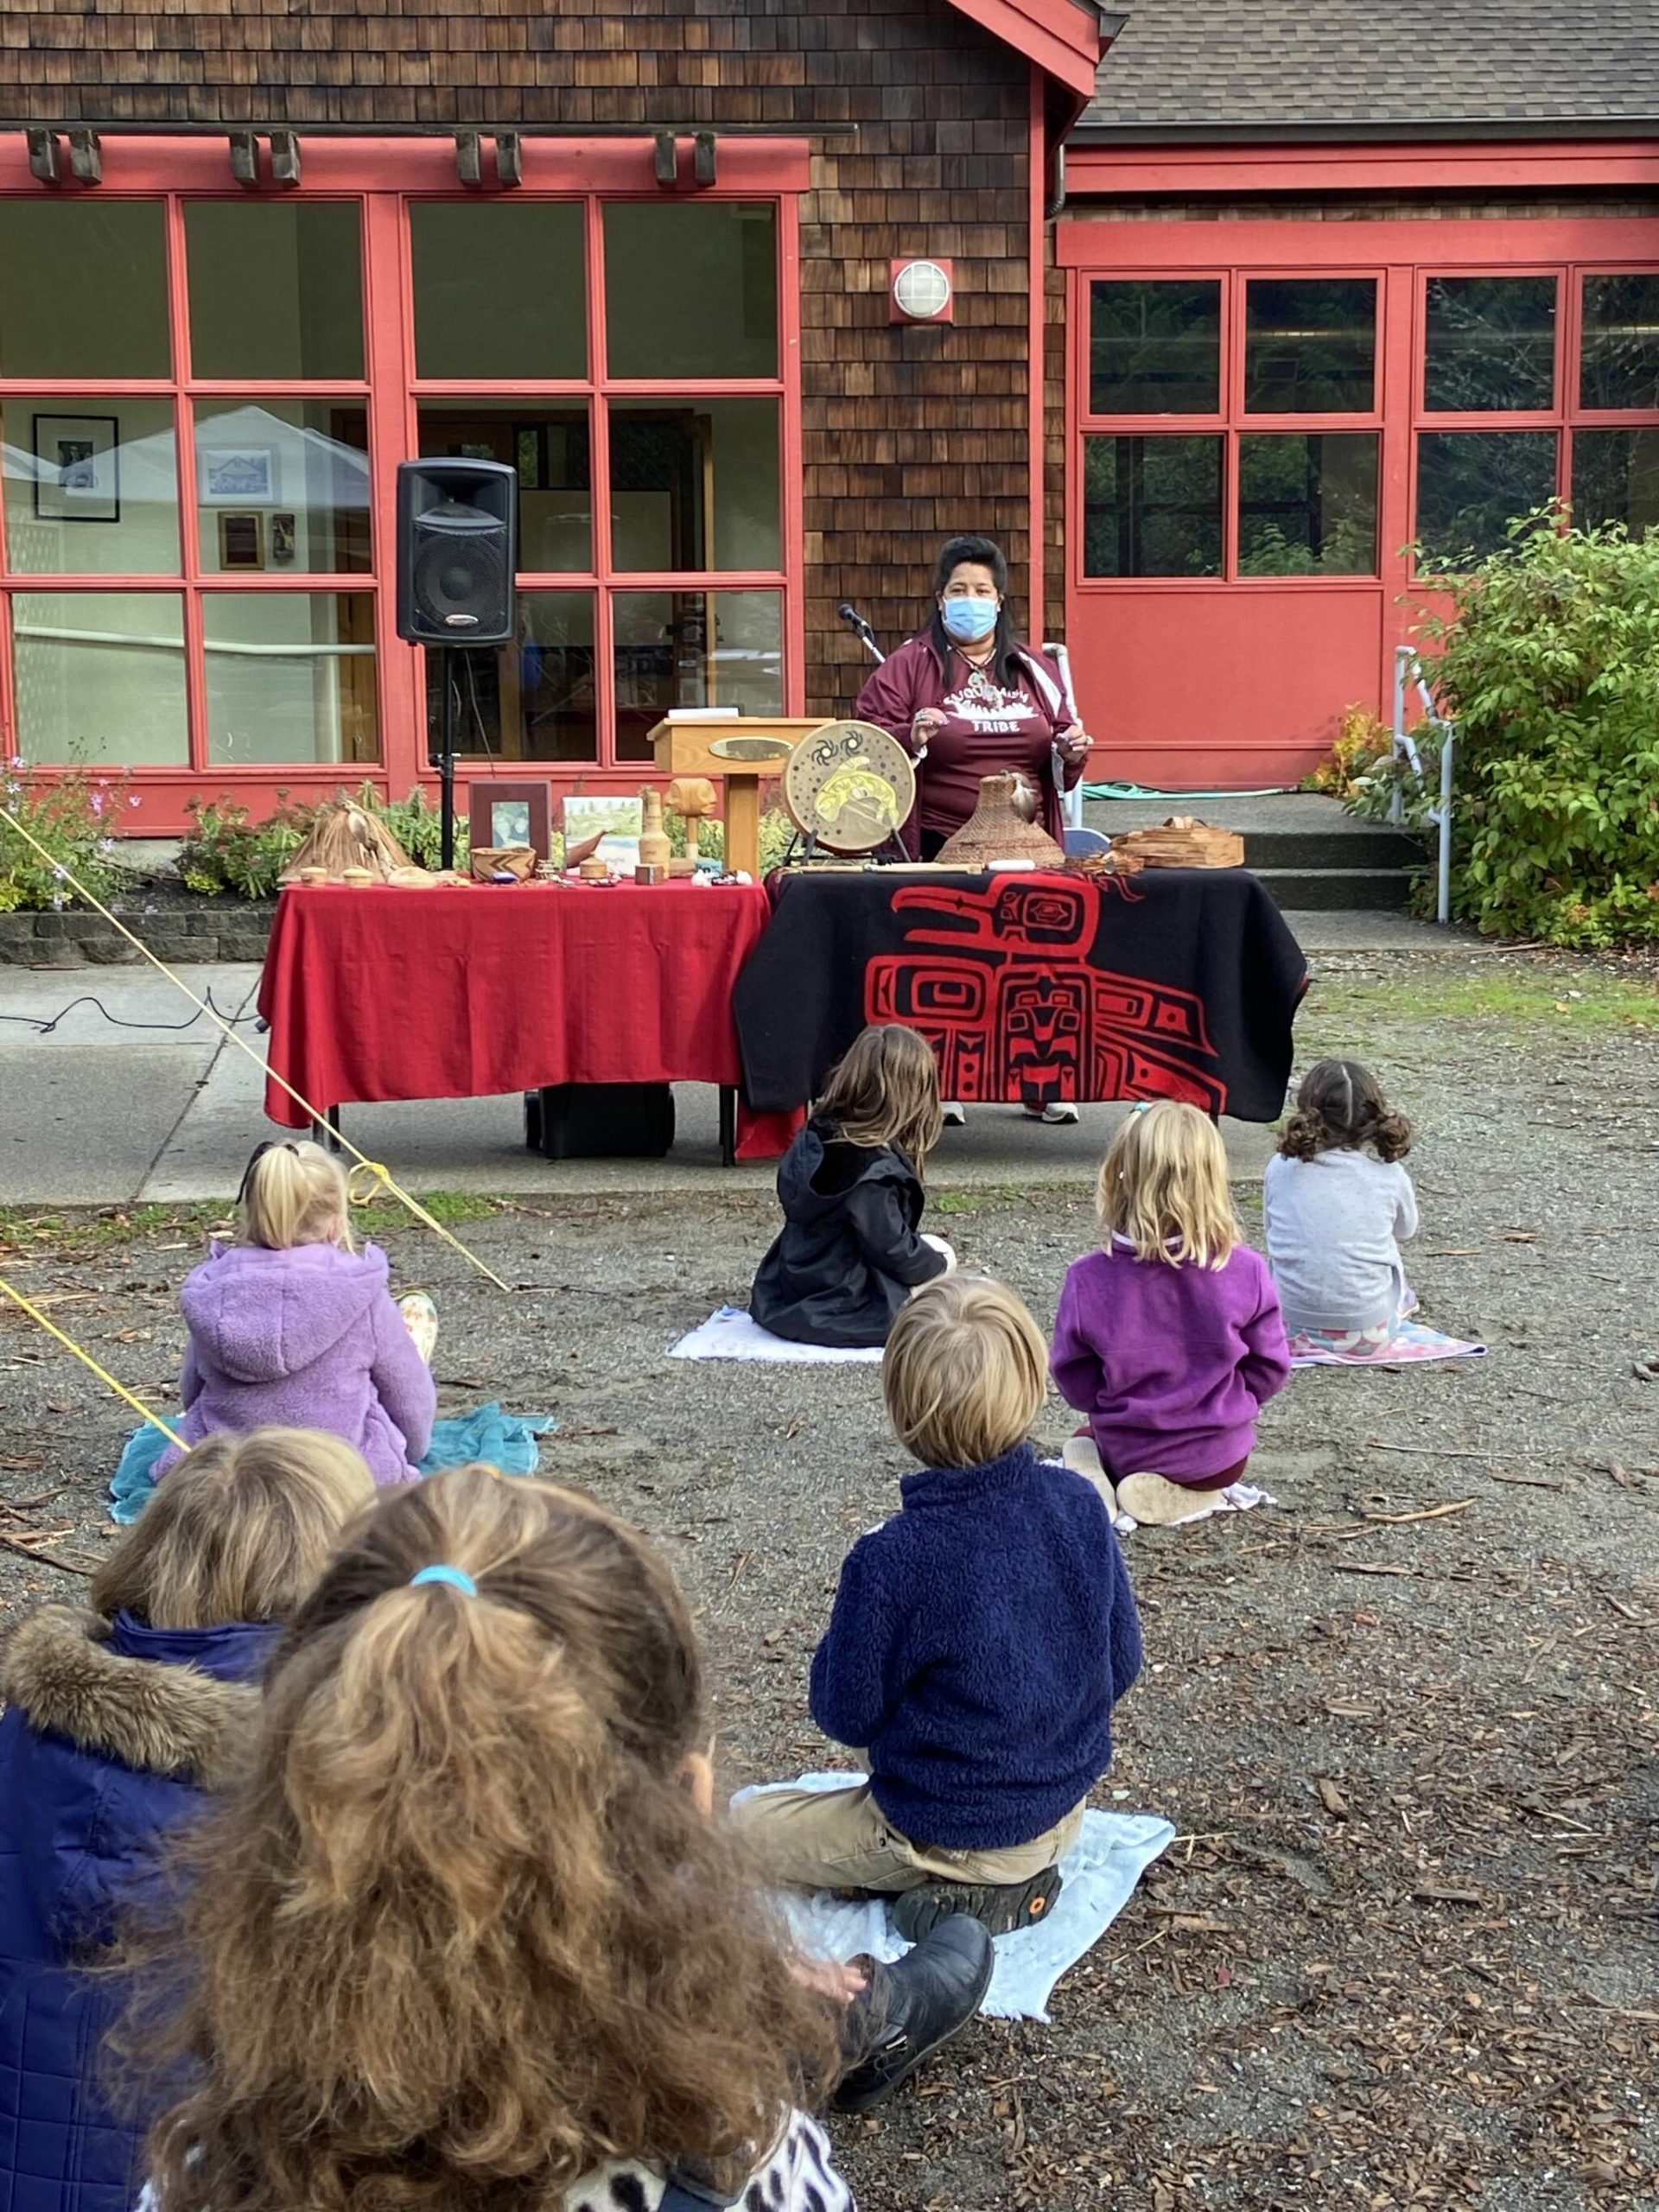 To celebrate Indigenous People’s Day Oct. 11, Celeste Loneia, a Suquamish artist and master weaver, teaches students at Island School about the uses of cedar and the role people play in protecting natural resources. She also made fry bread. First-graders read a story about salmon and other students shared information they learned about things like snowshoes and also played music by Suquamish artist Calina Lawrence. Courtesy Photo